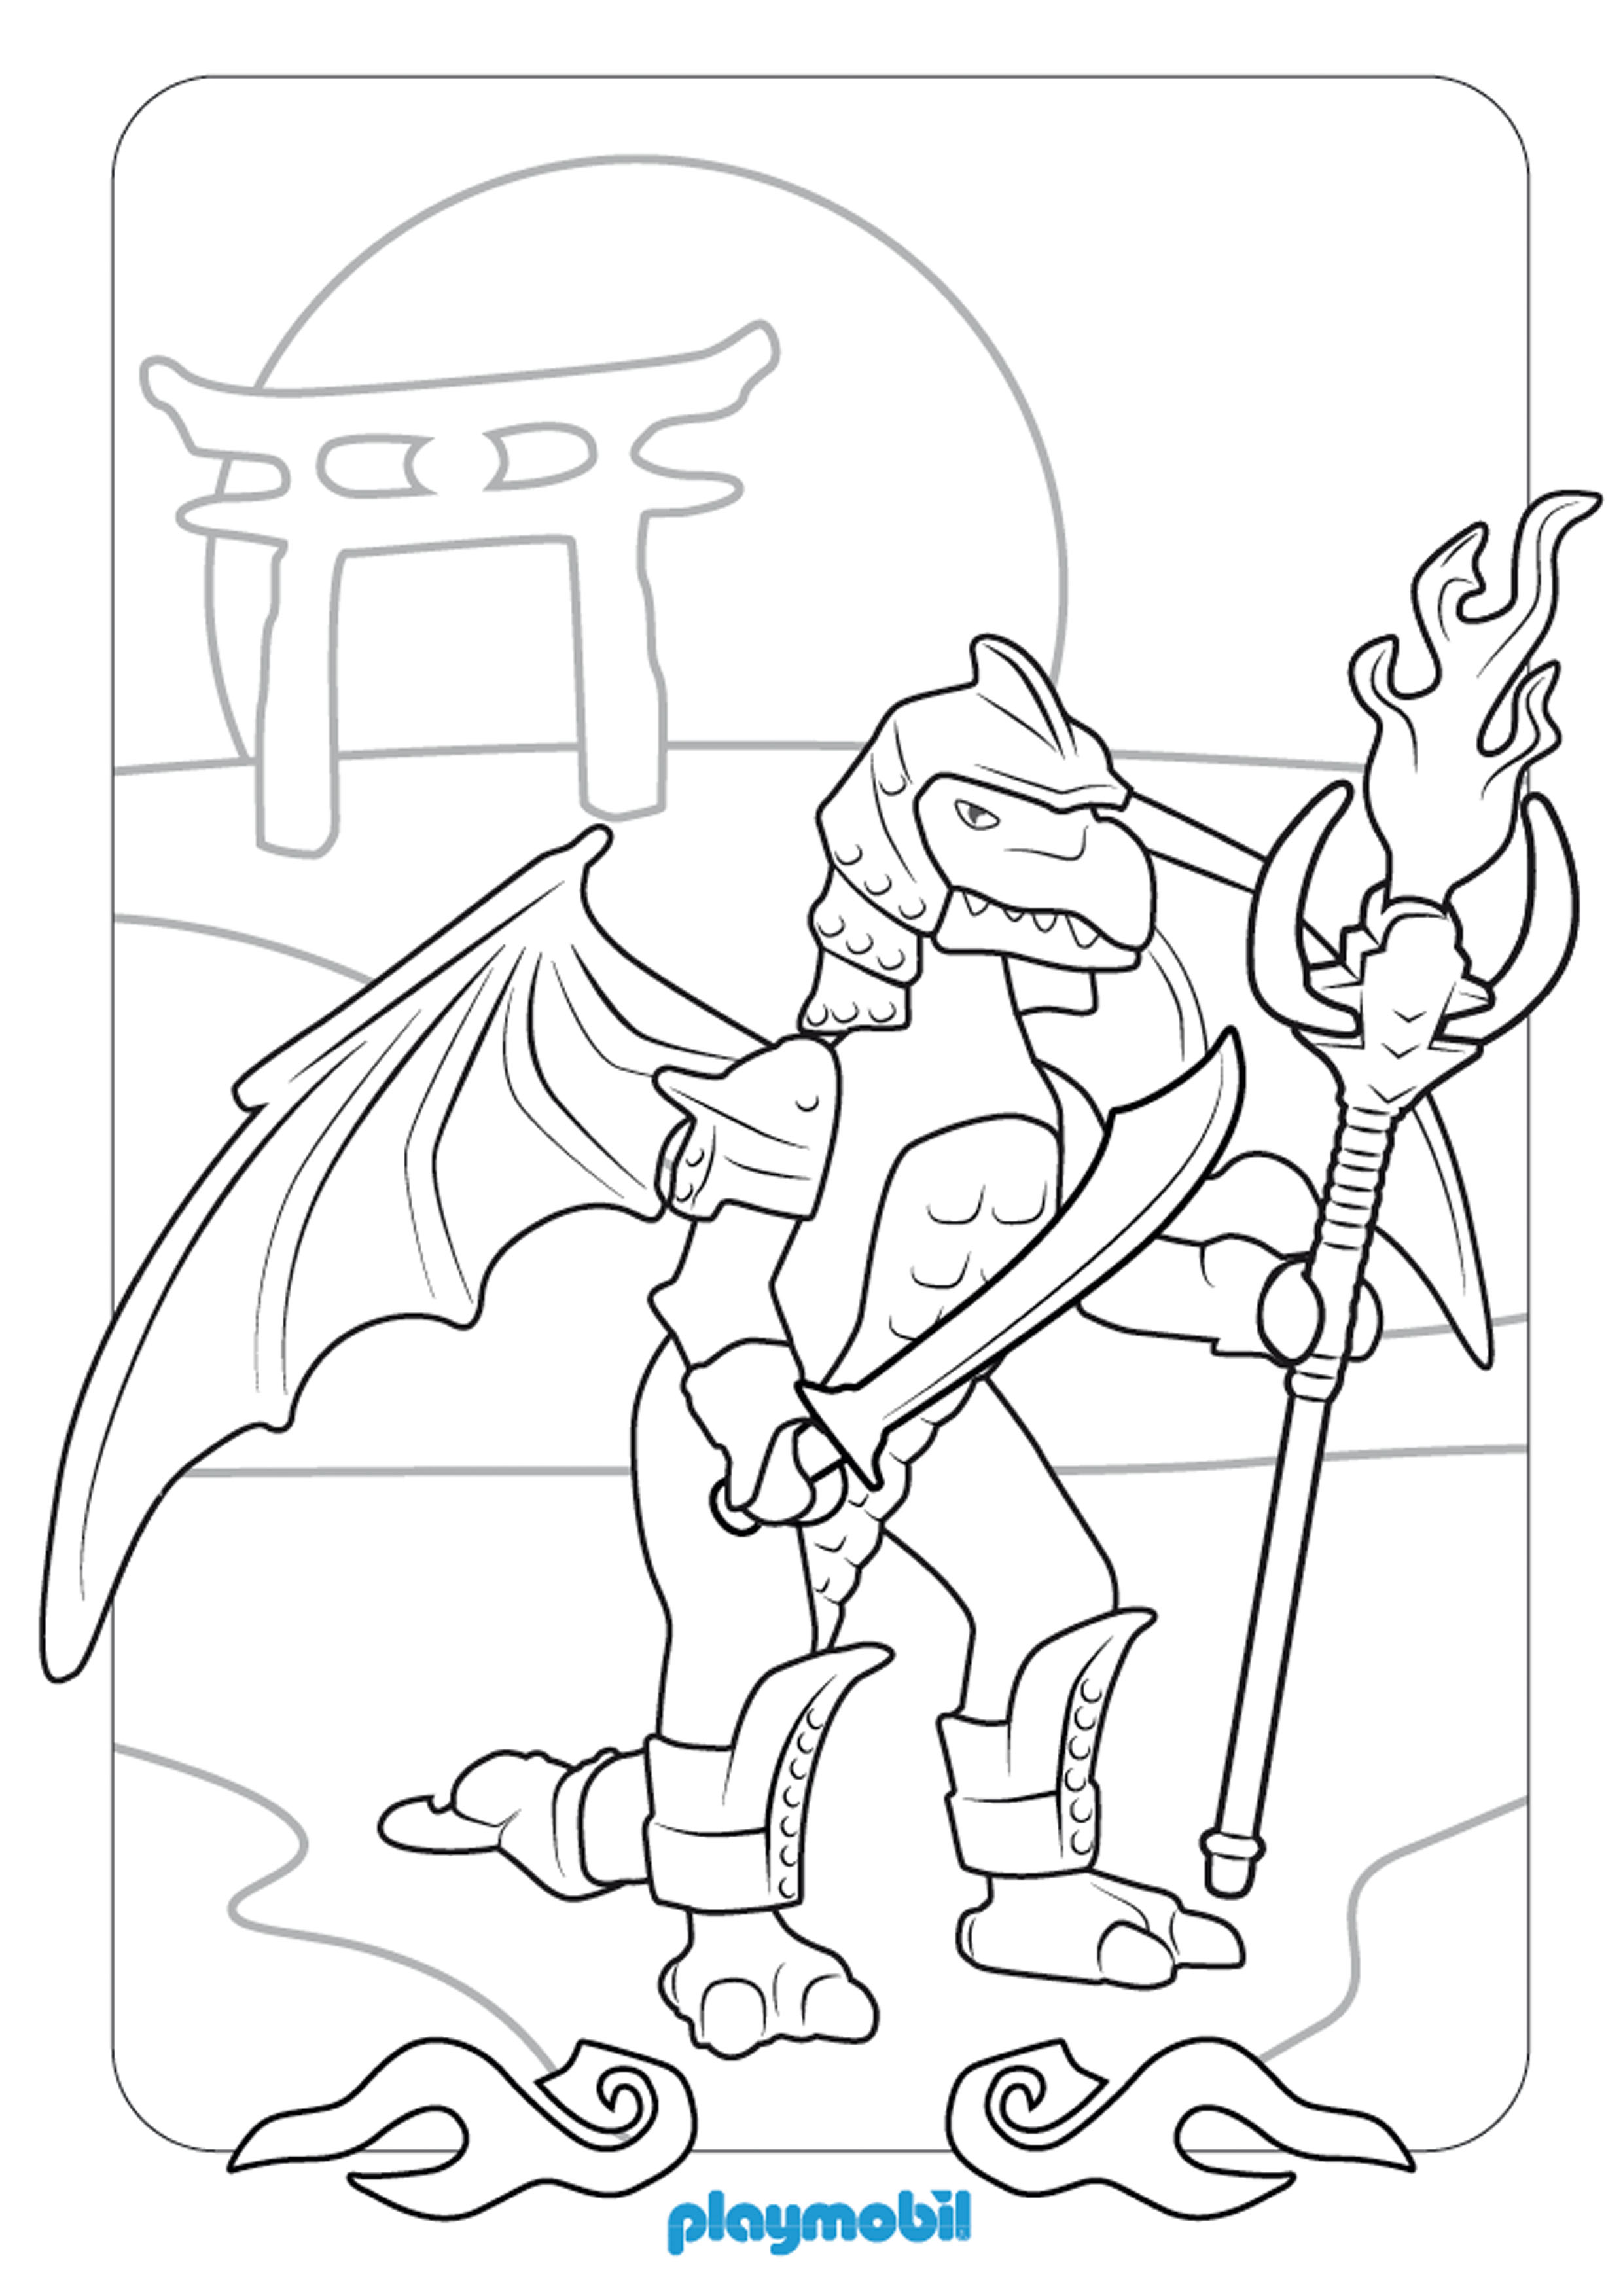 playmobil coloring pages at getcolorings  free